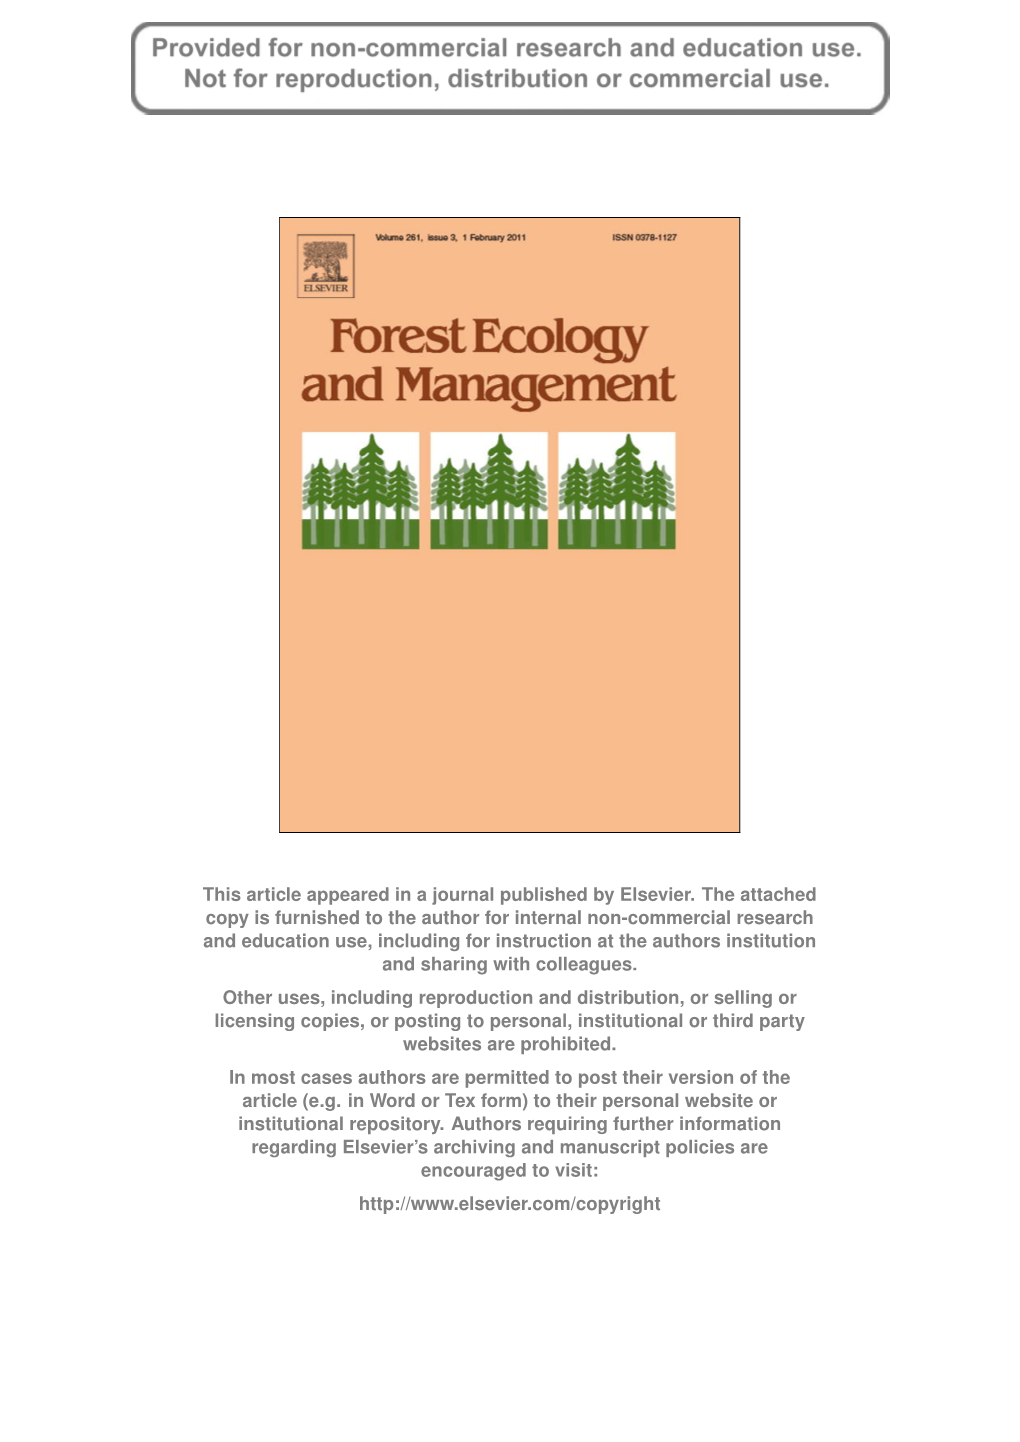 2011 Forest Ecology and Management.Pdf